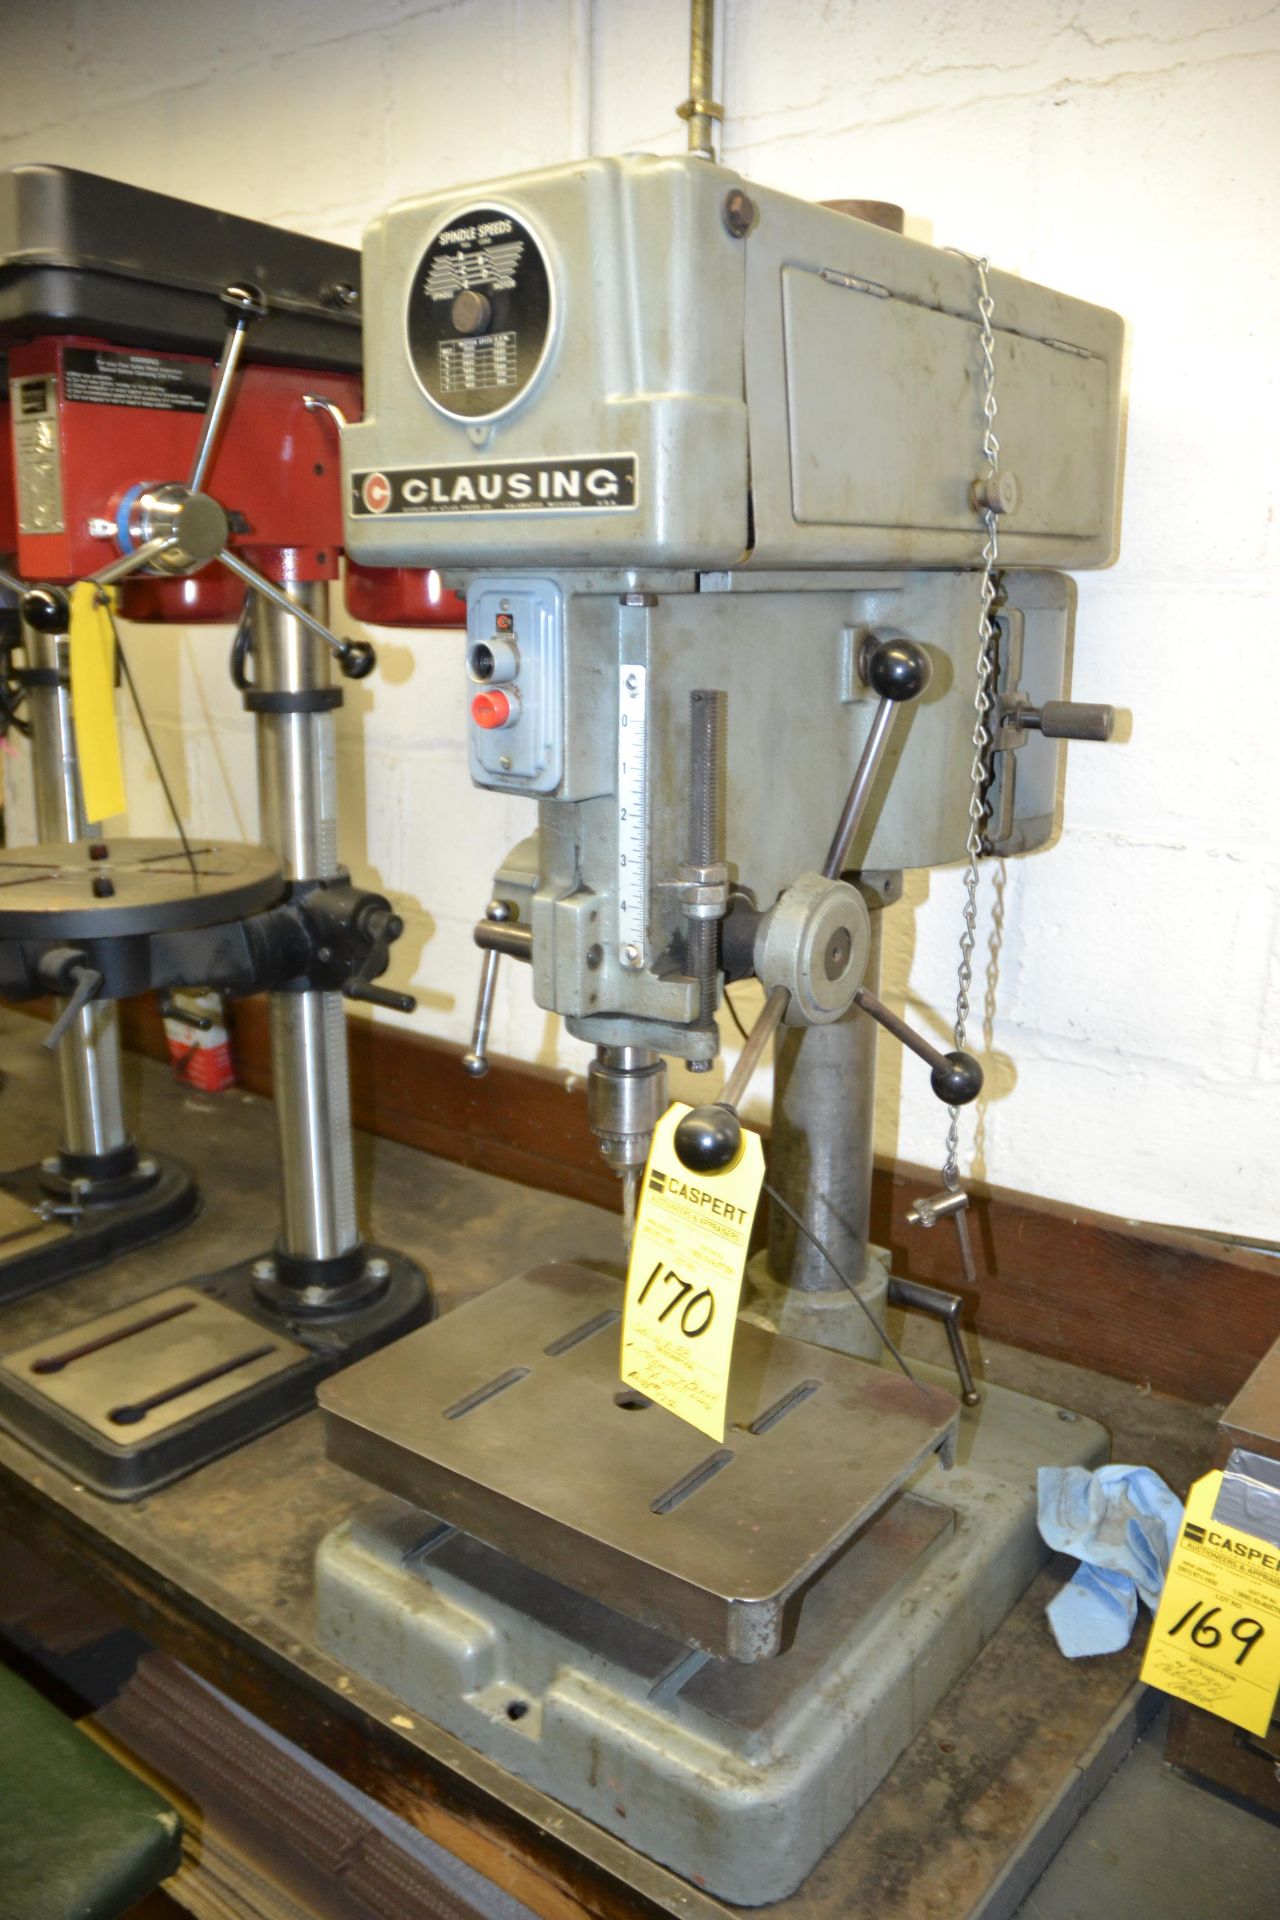 Clausing Bench Top Drill Press, M: 1750